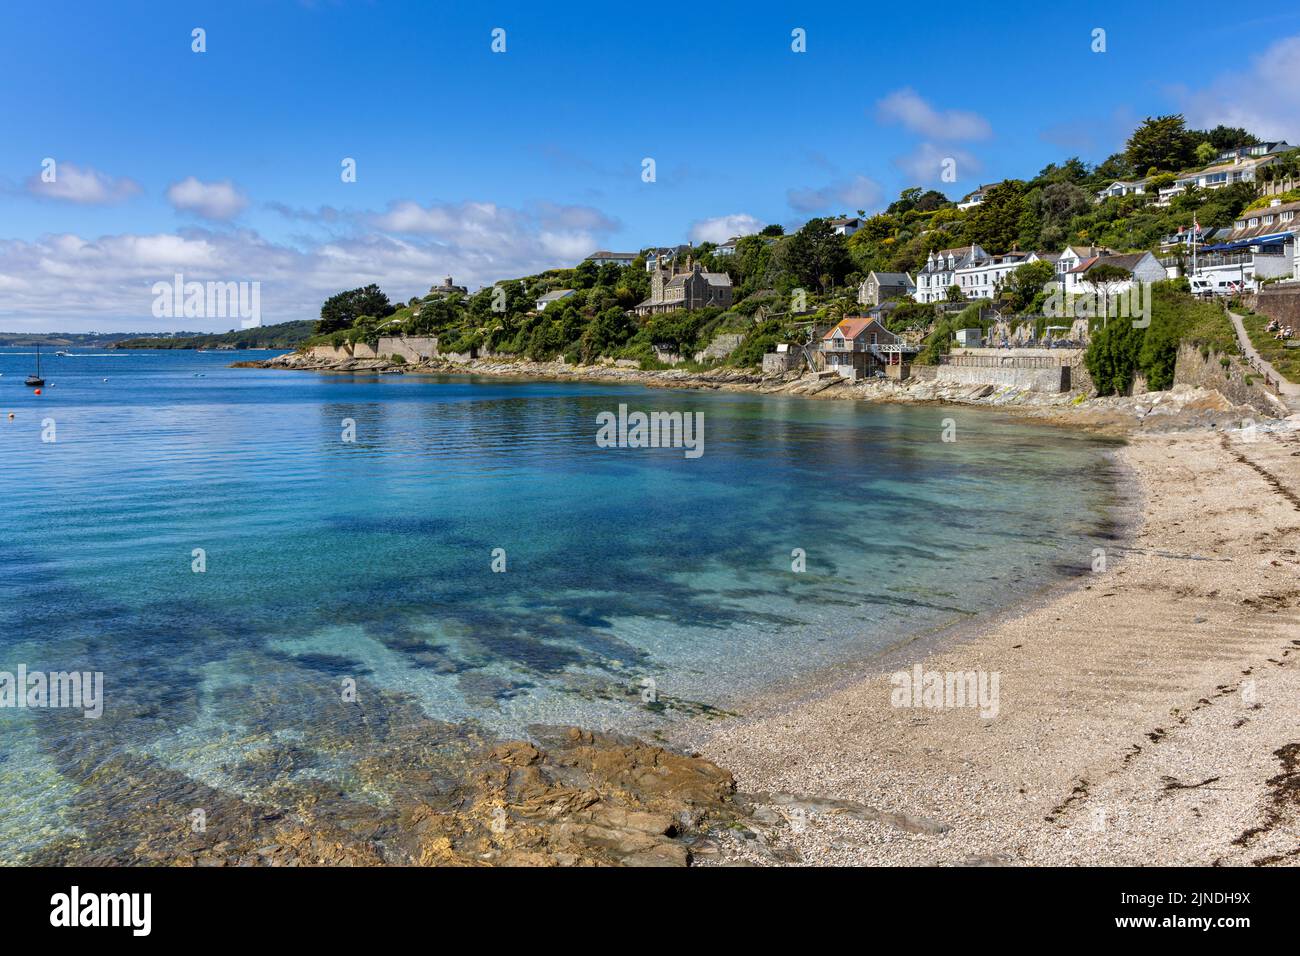 Tavern beach at St.Mawes on the Roseland peninsular in Cornwall, England. Stock Photo